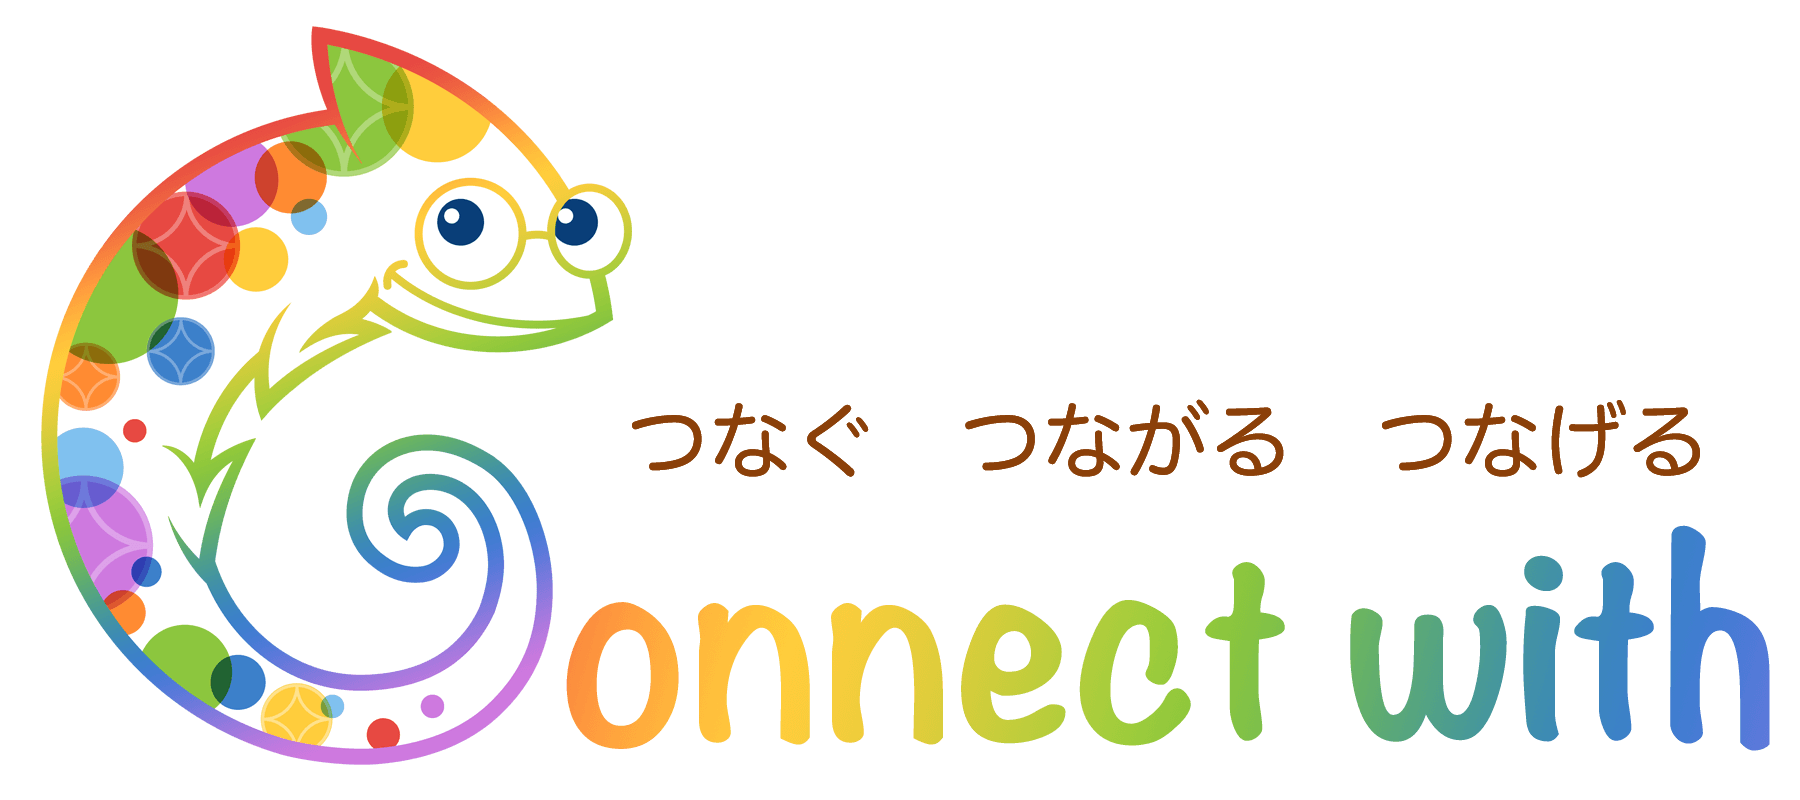 Connect with